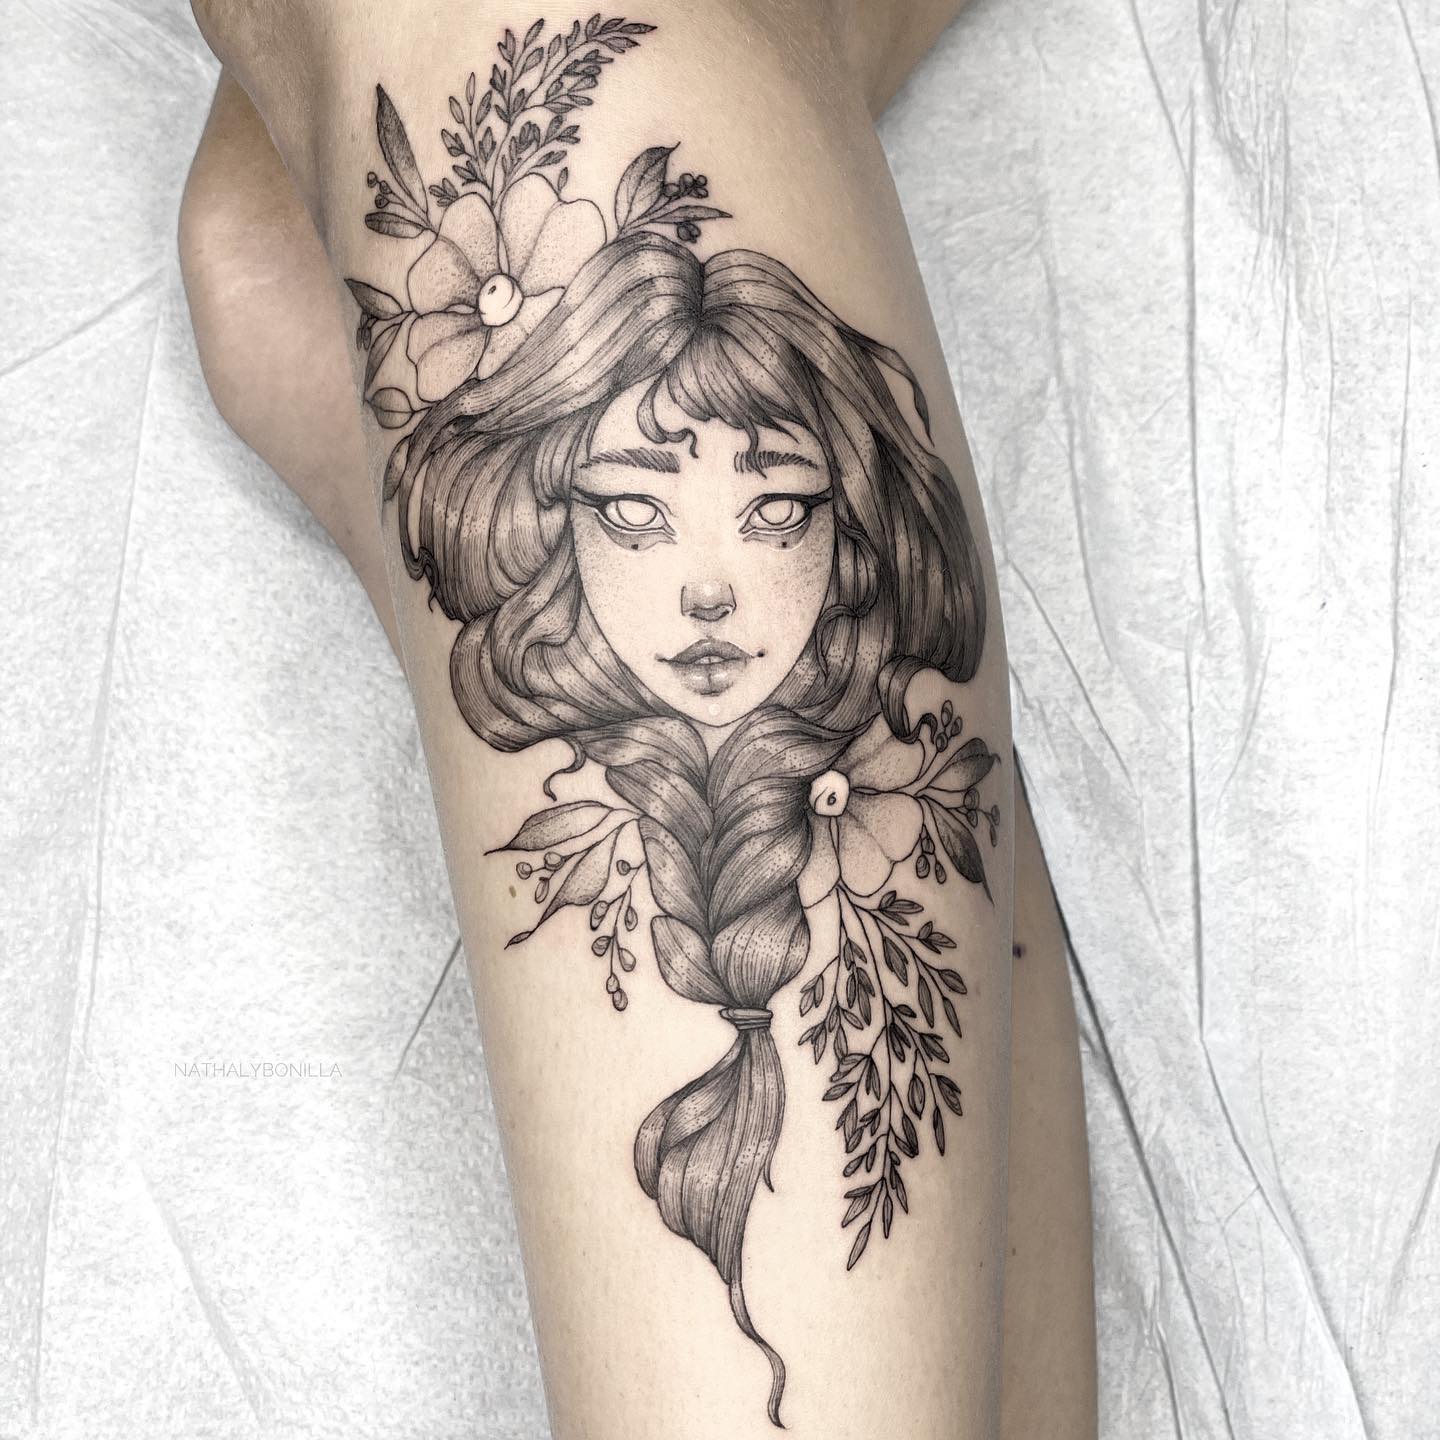 Intricate Female Portrait with Floral Embellishments